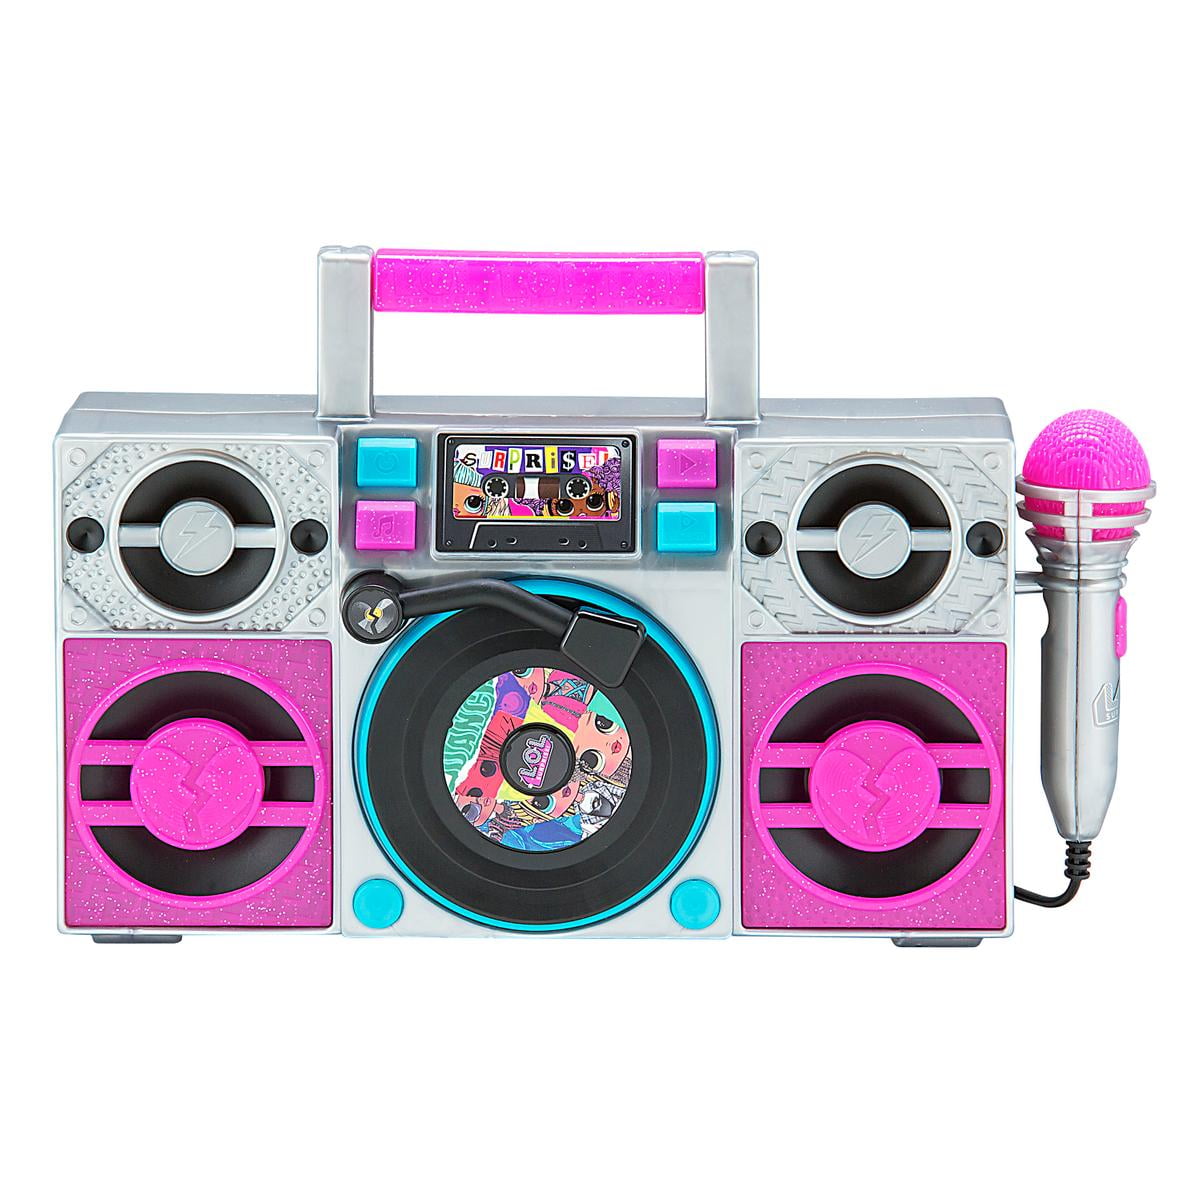 L.O.L Surprise! REMIX Bluetooth MP3 Boombox with Microphone, Pink, LL-115